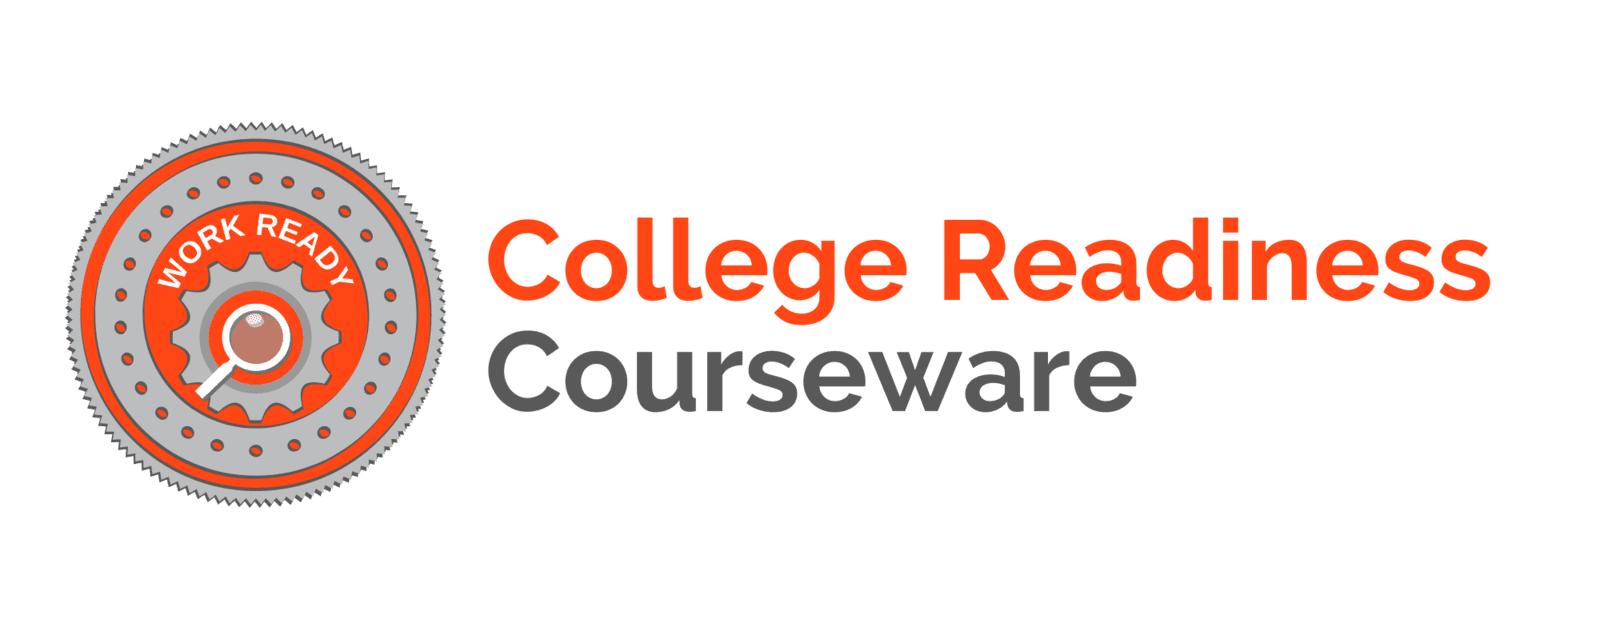 College Readiness Coursweware